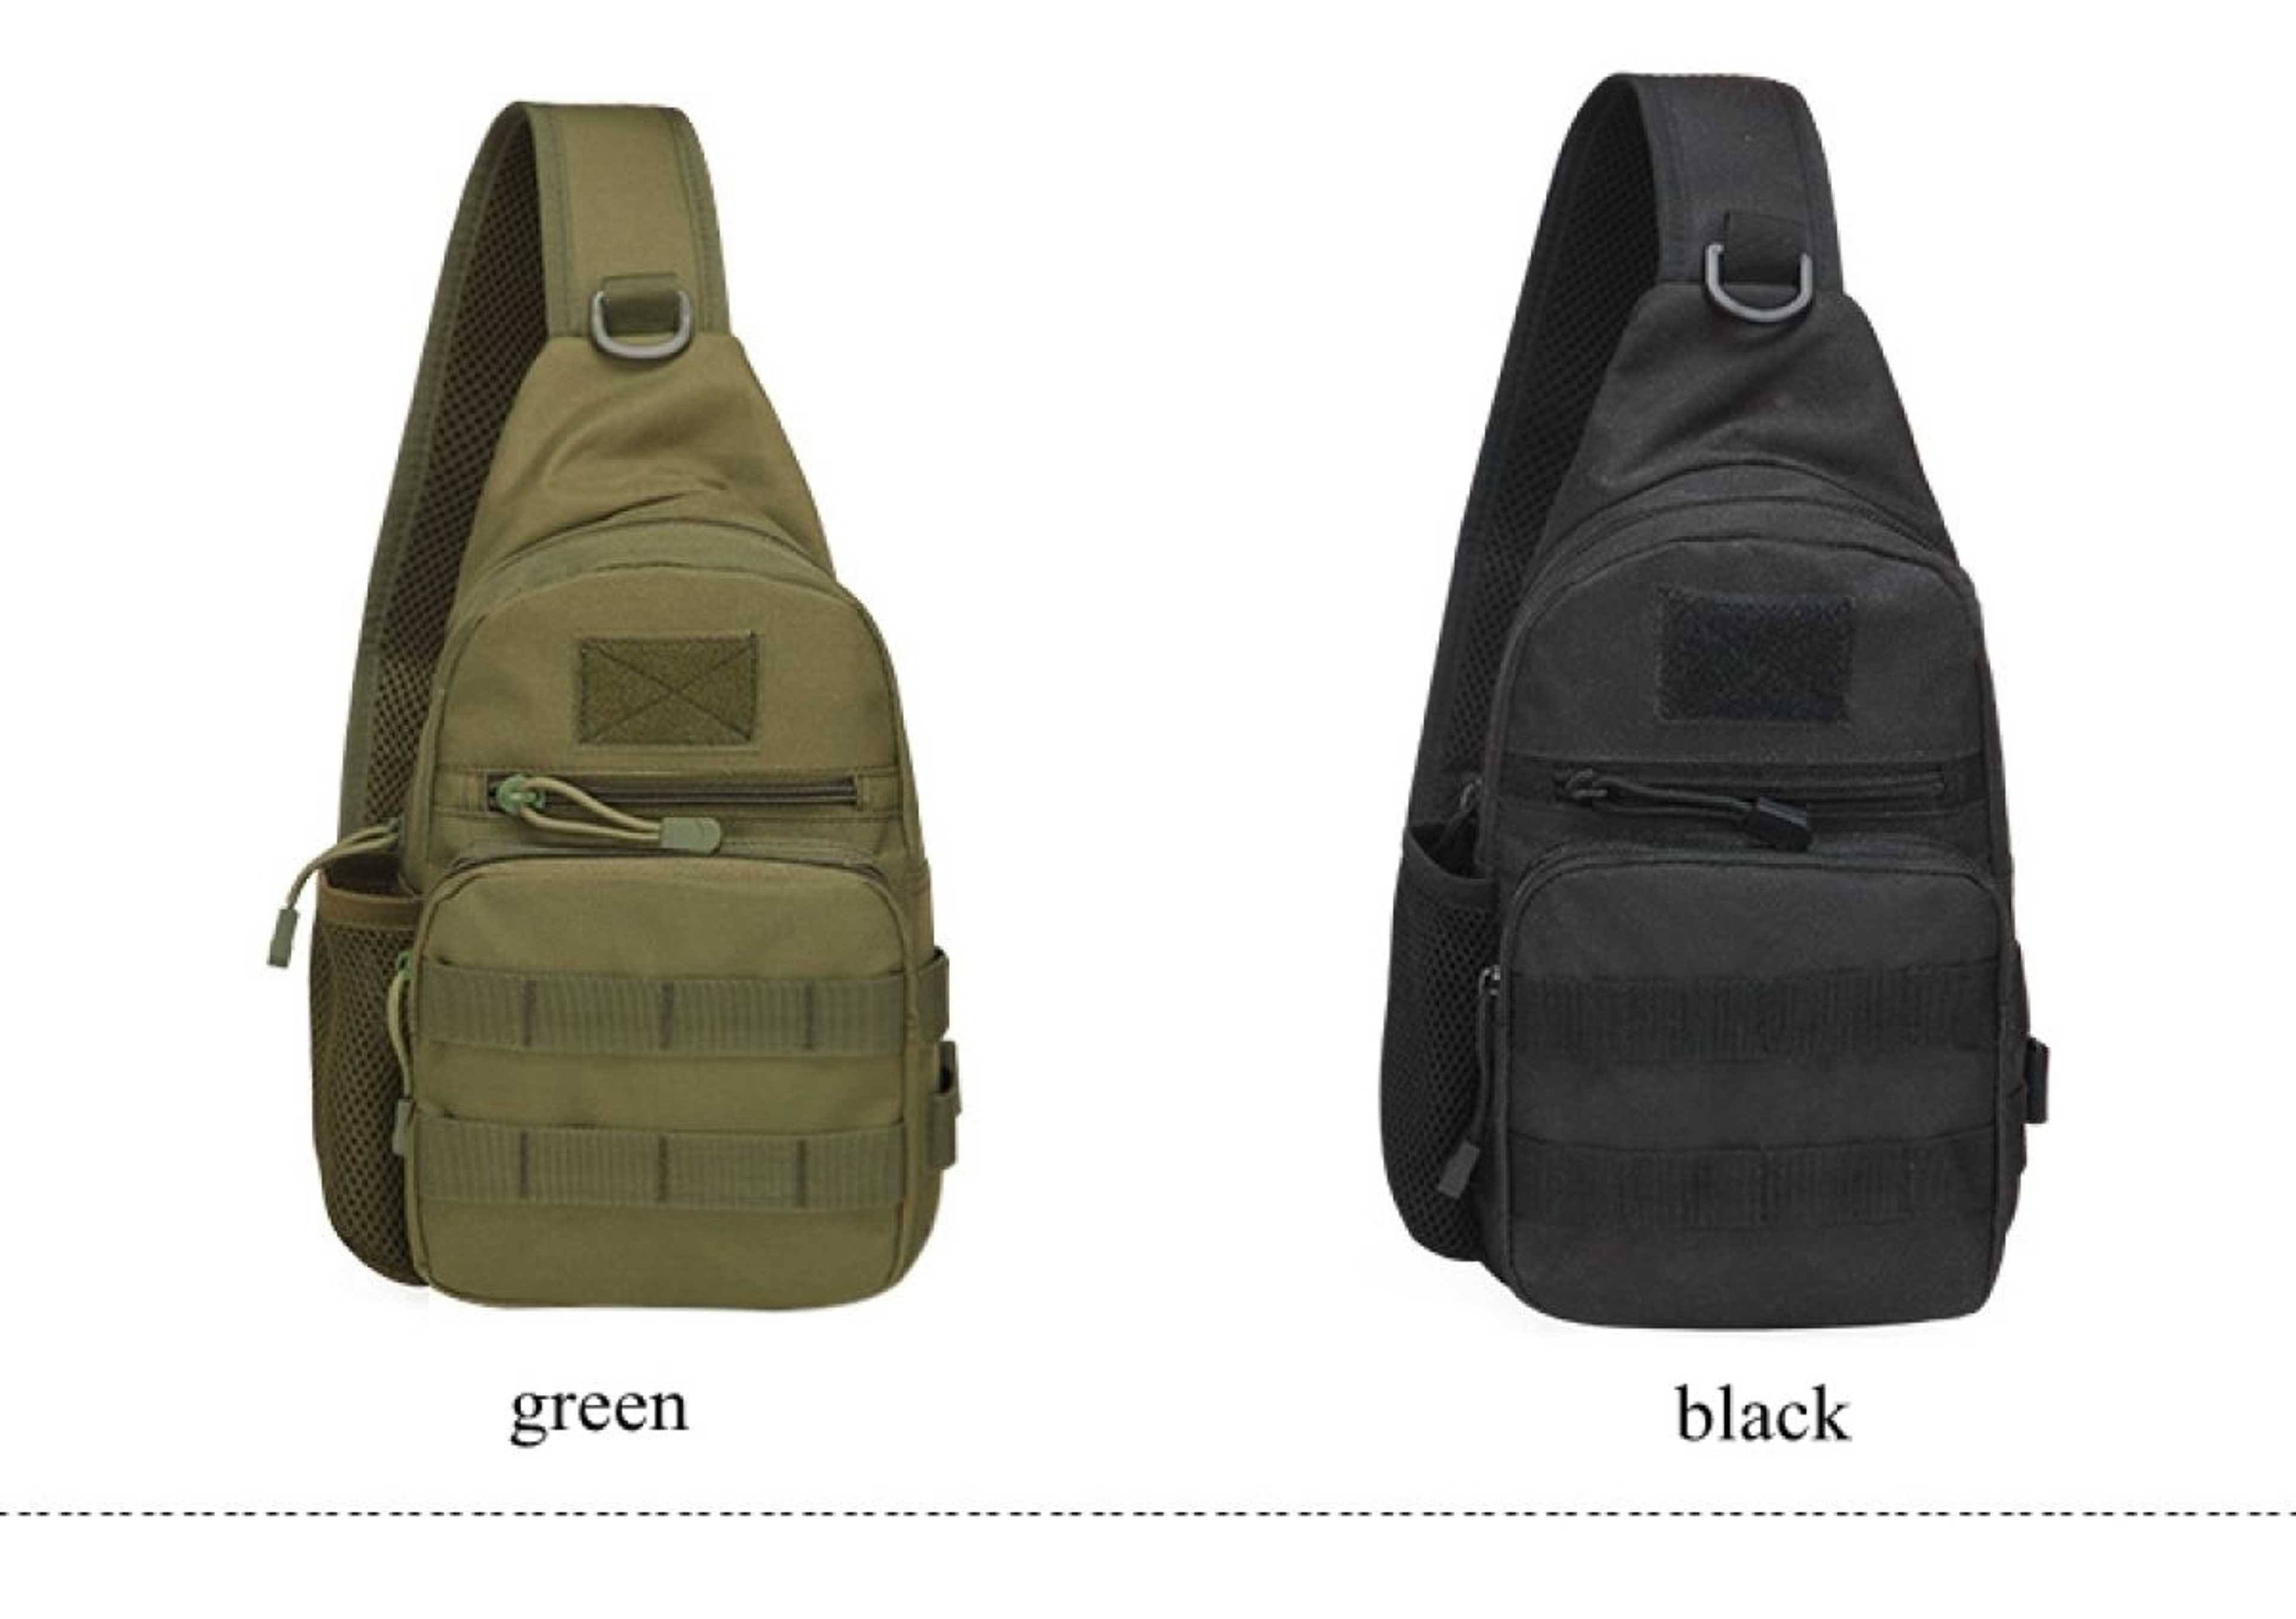 Outdoor Military Camping Shoulder Bag Chest Pack with Bottle Holder Green Color